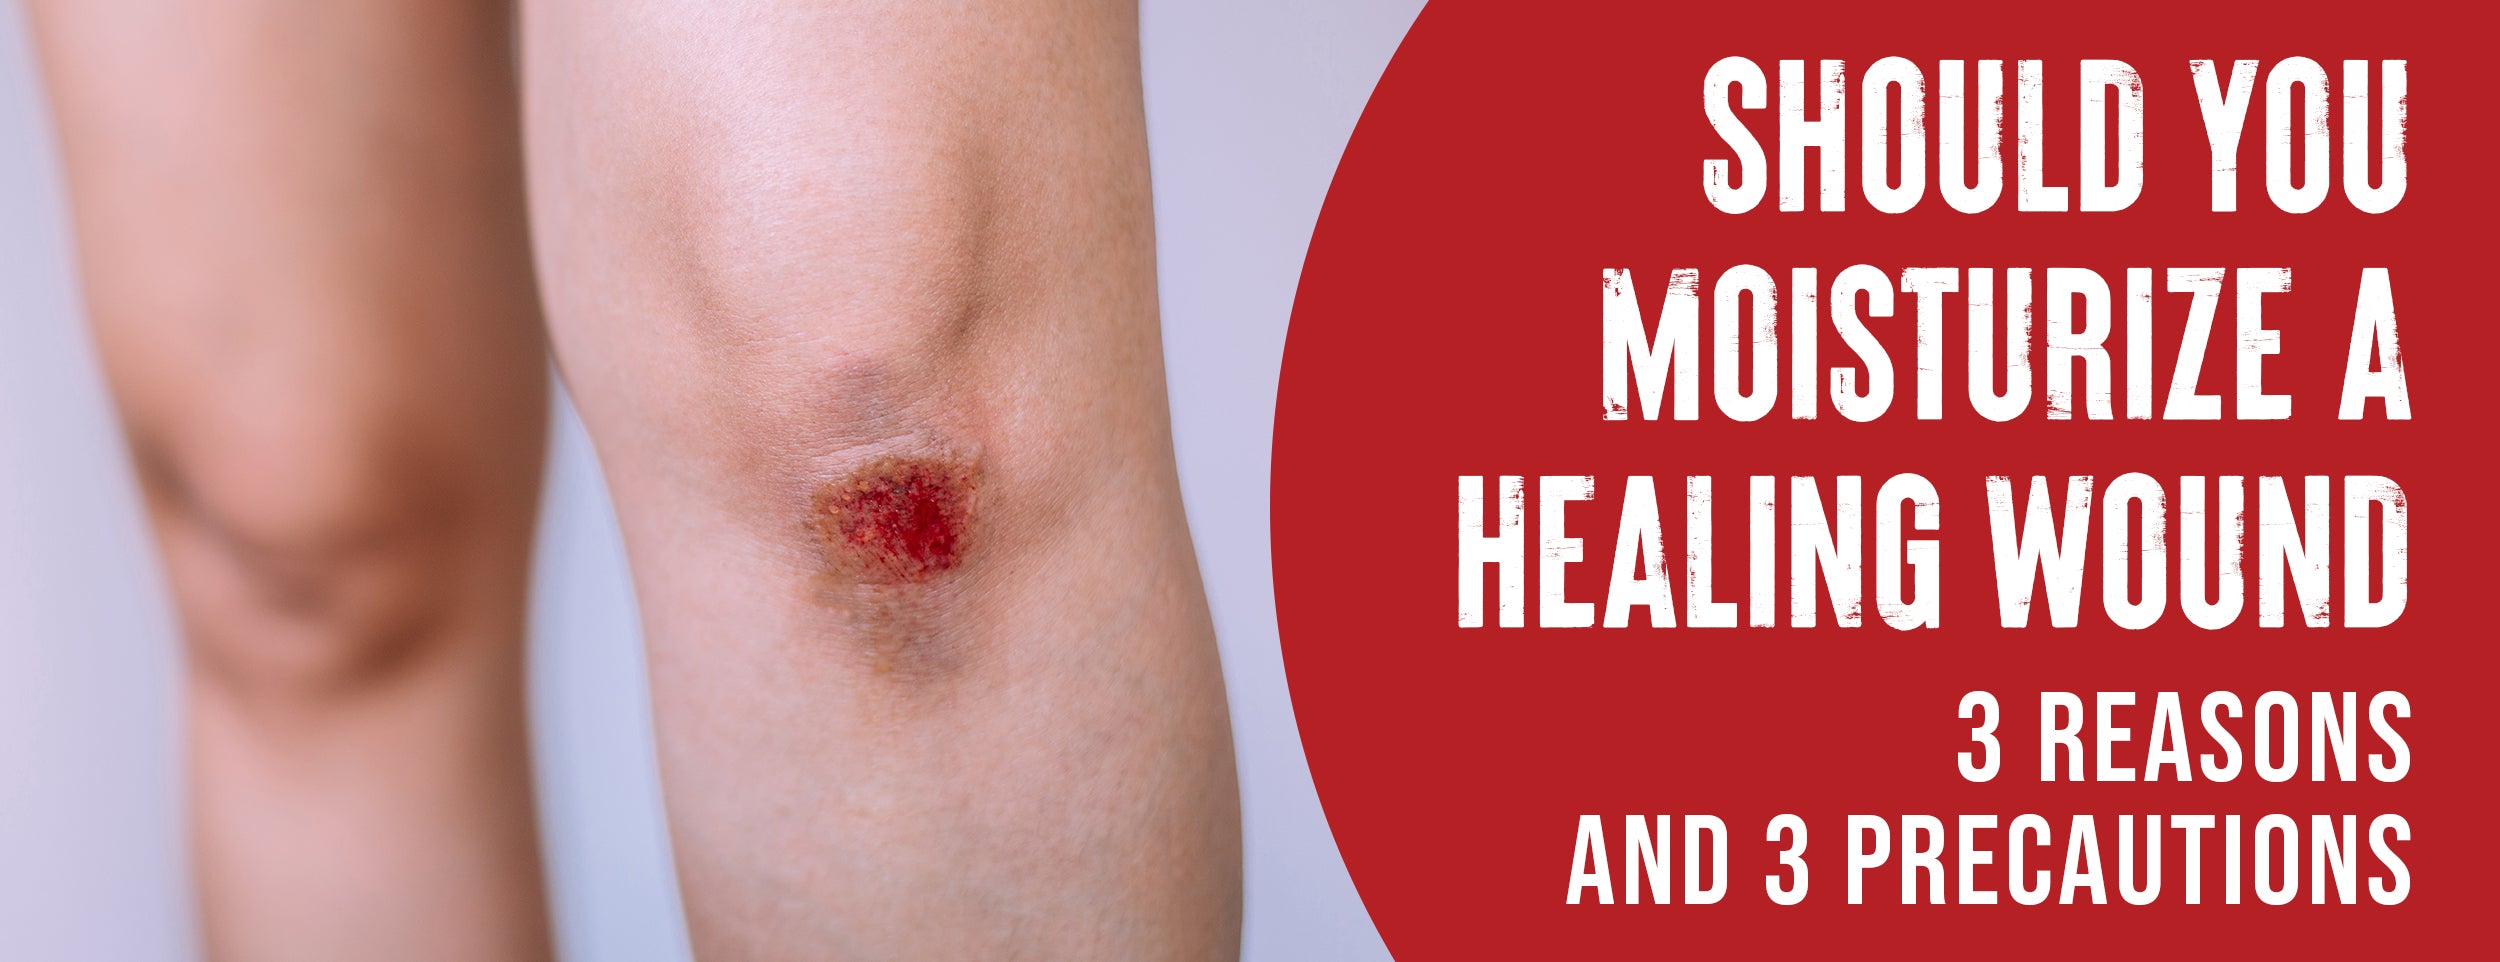 Moisturizing A Healing Wound: Science & 3 Common Methods [with Precautions]